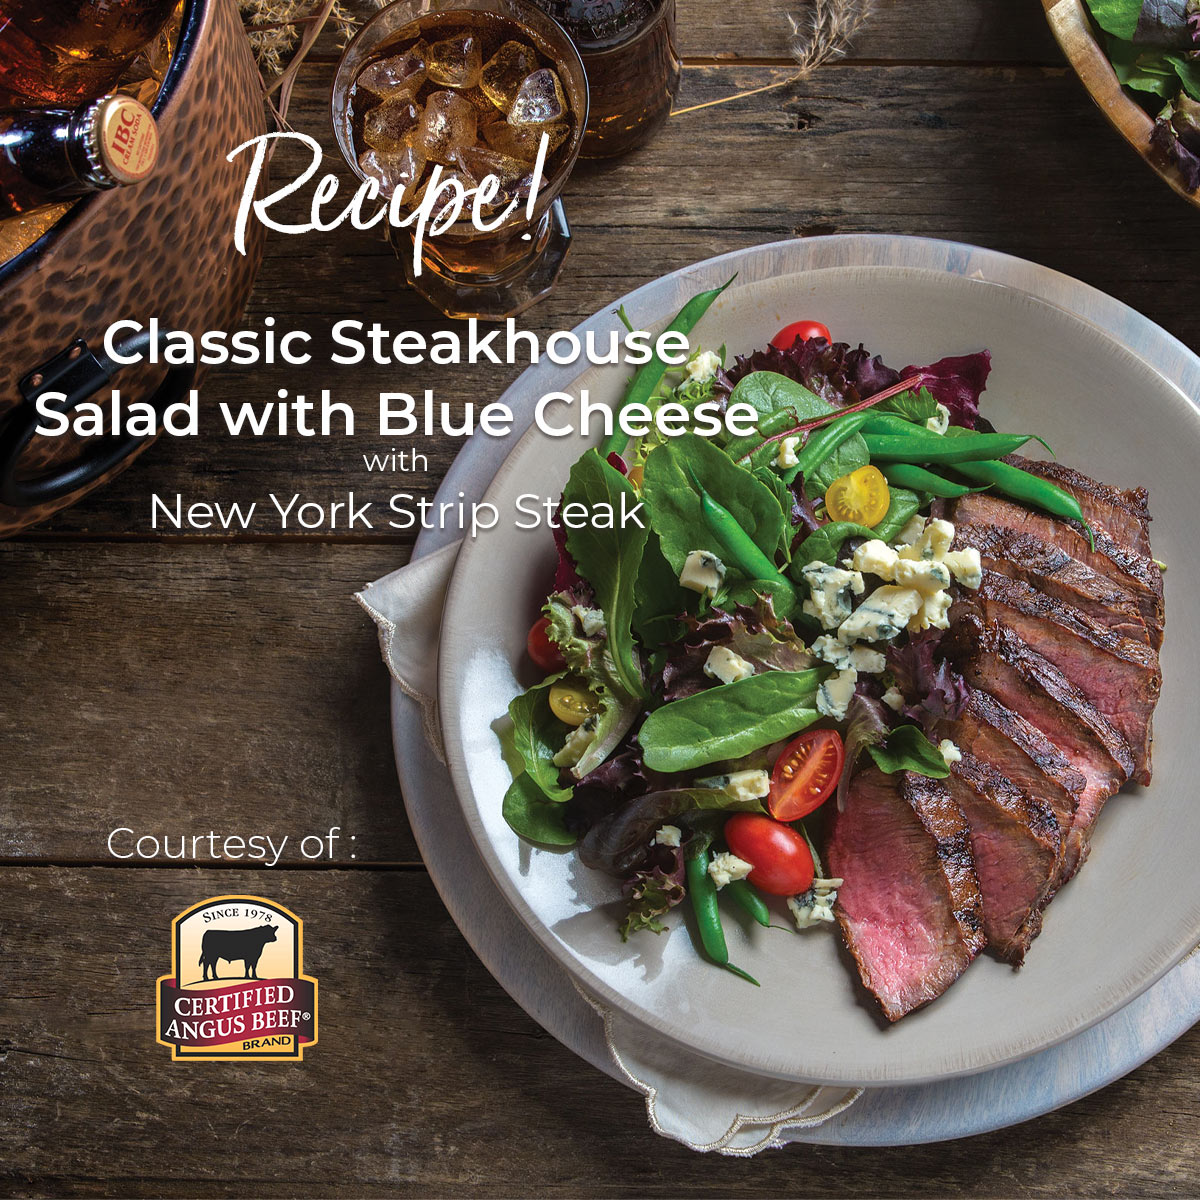 Click this image to download our featured recipe from Certified Angus Beef.